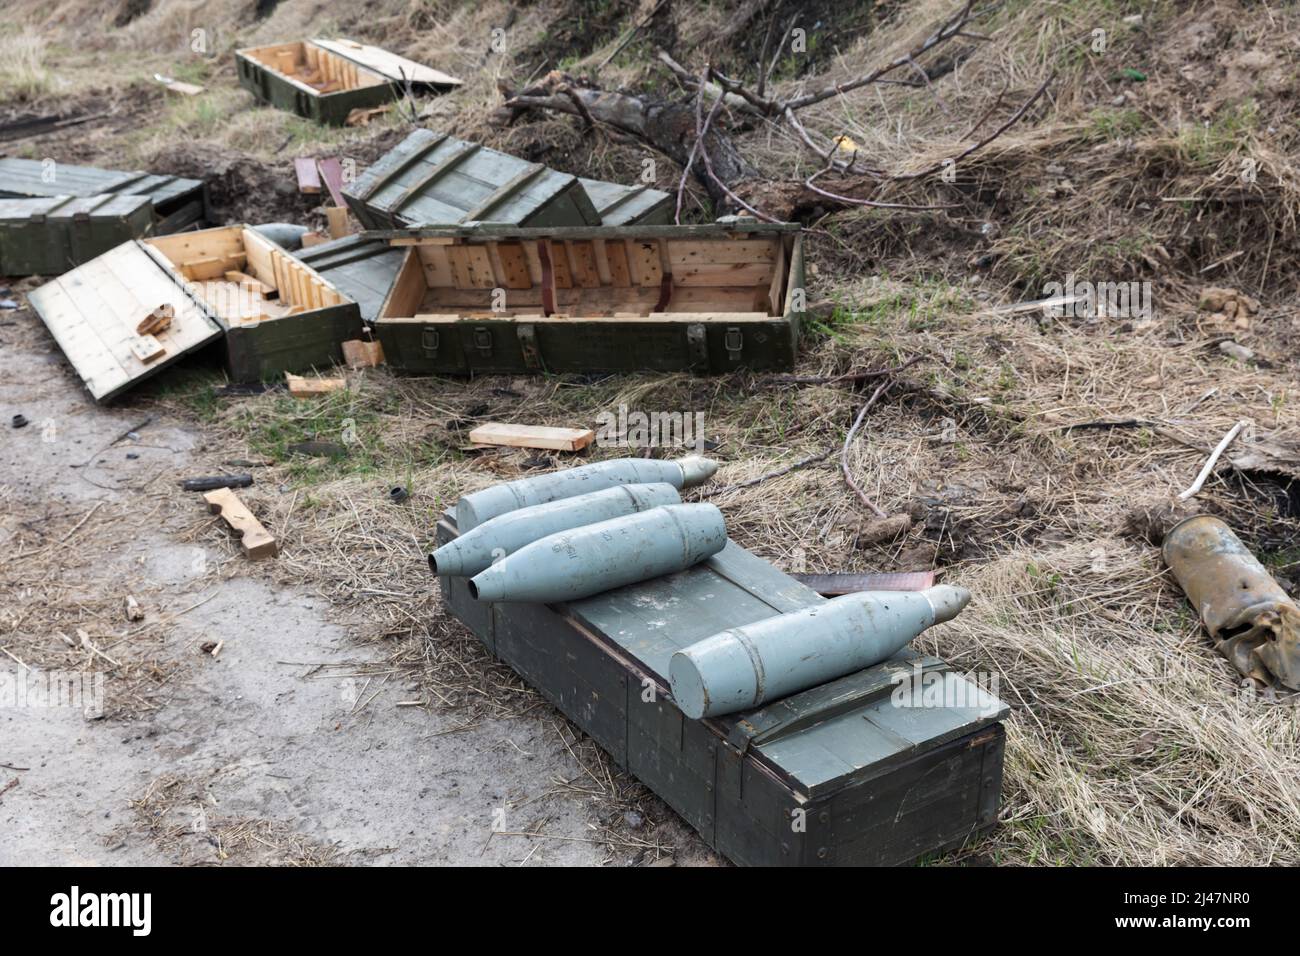 Andriivka, Ukraine. 12th Apr, 2022. Abandoned military equipment, shells and empty boxes of weapons are seen lying in the middle of the field along the road near Andriivka after the retreat of Russian troops. (Photo by Mykhaylo Palinchak/SOPA Images/Sipa USA) Credit: Sipa USA/Alamy Live News Stock Photo